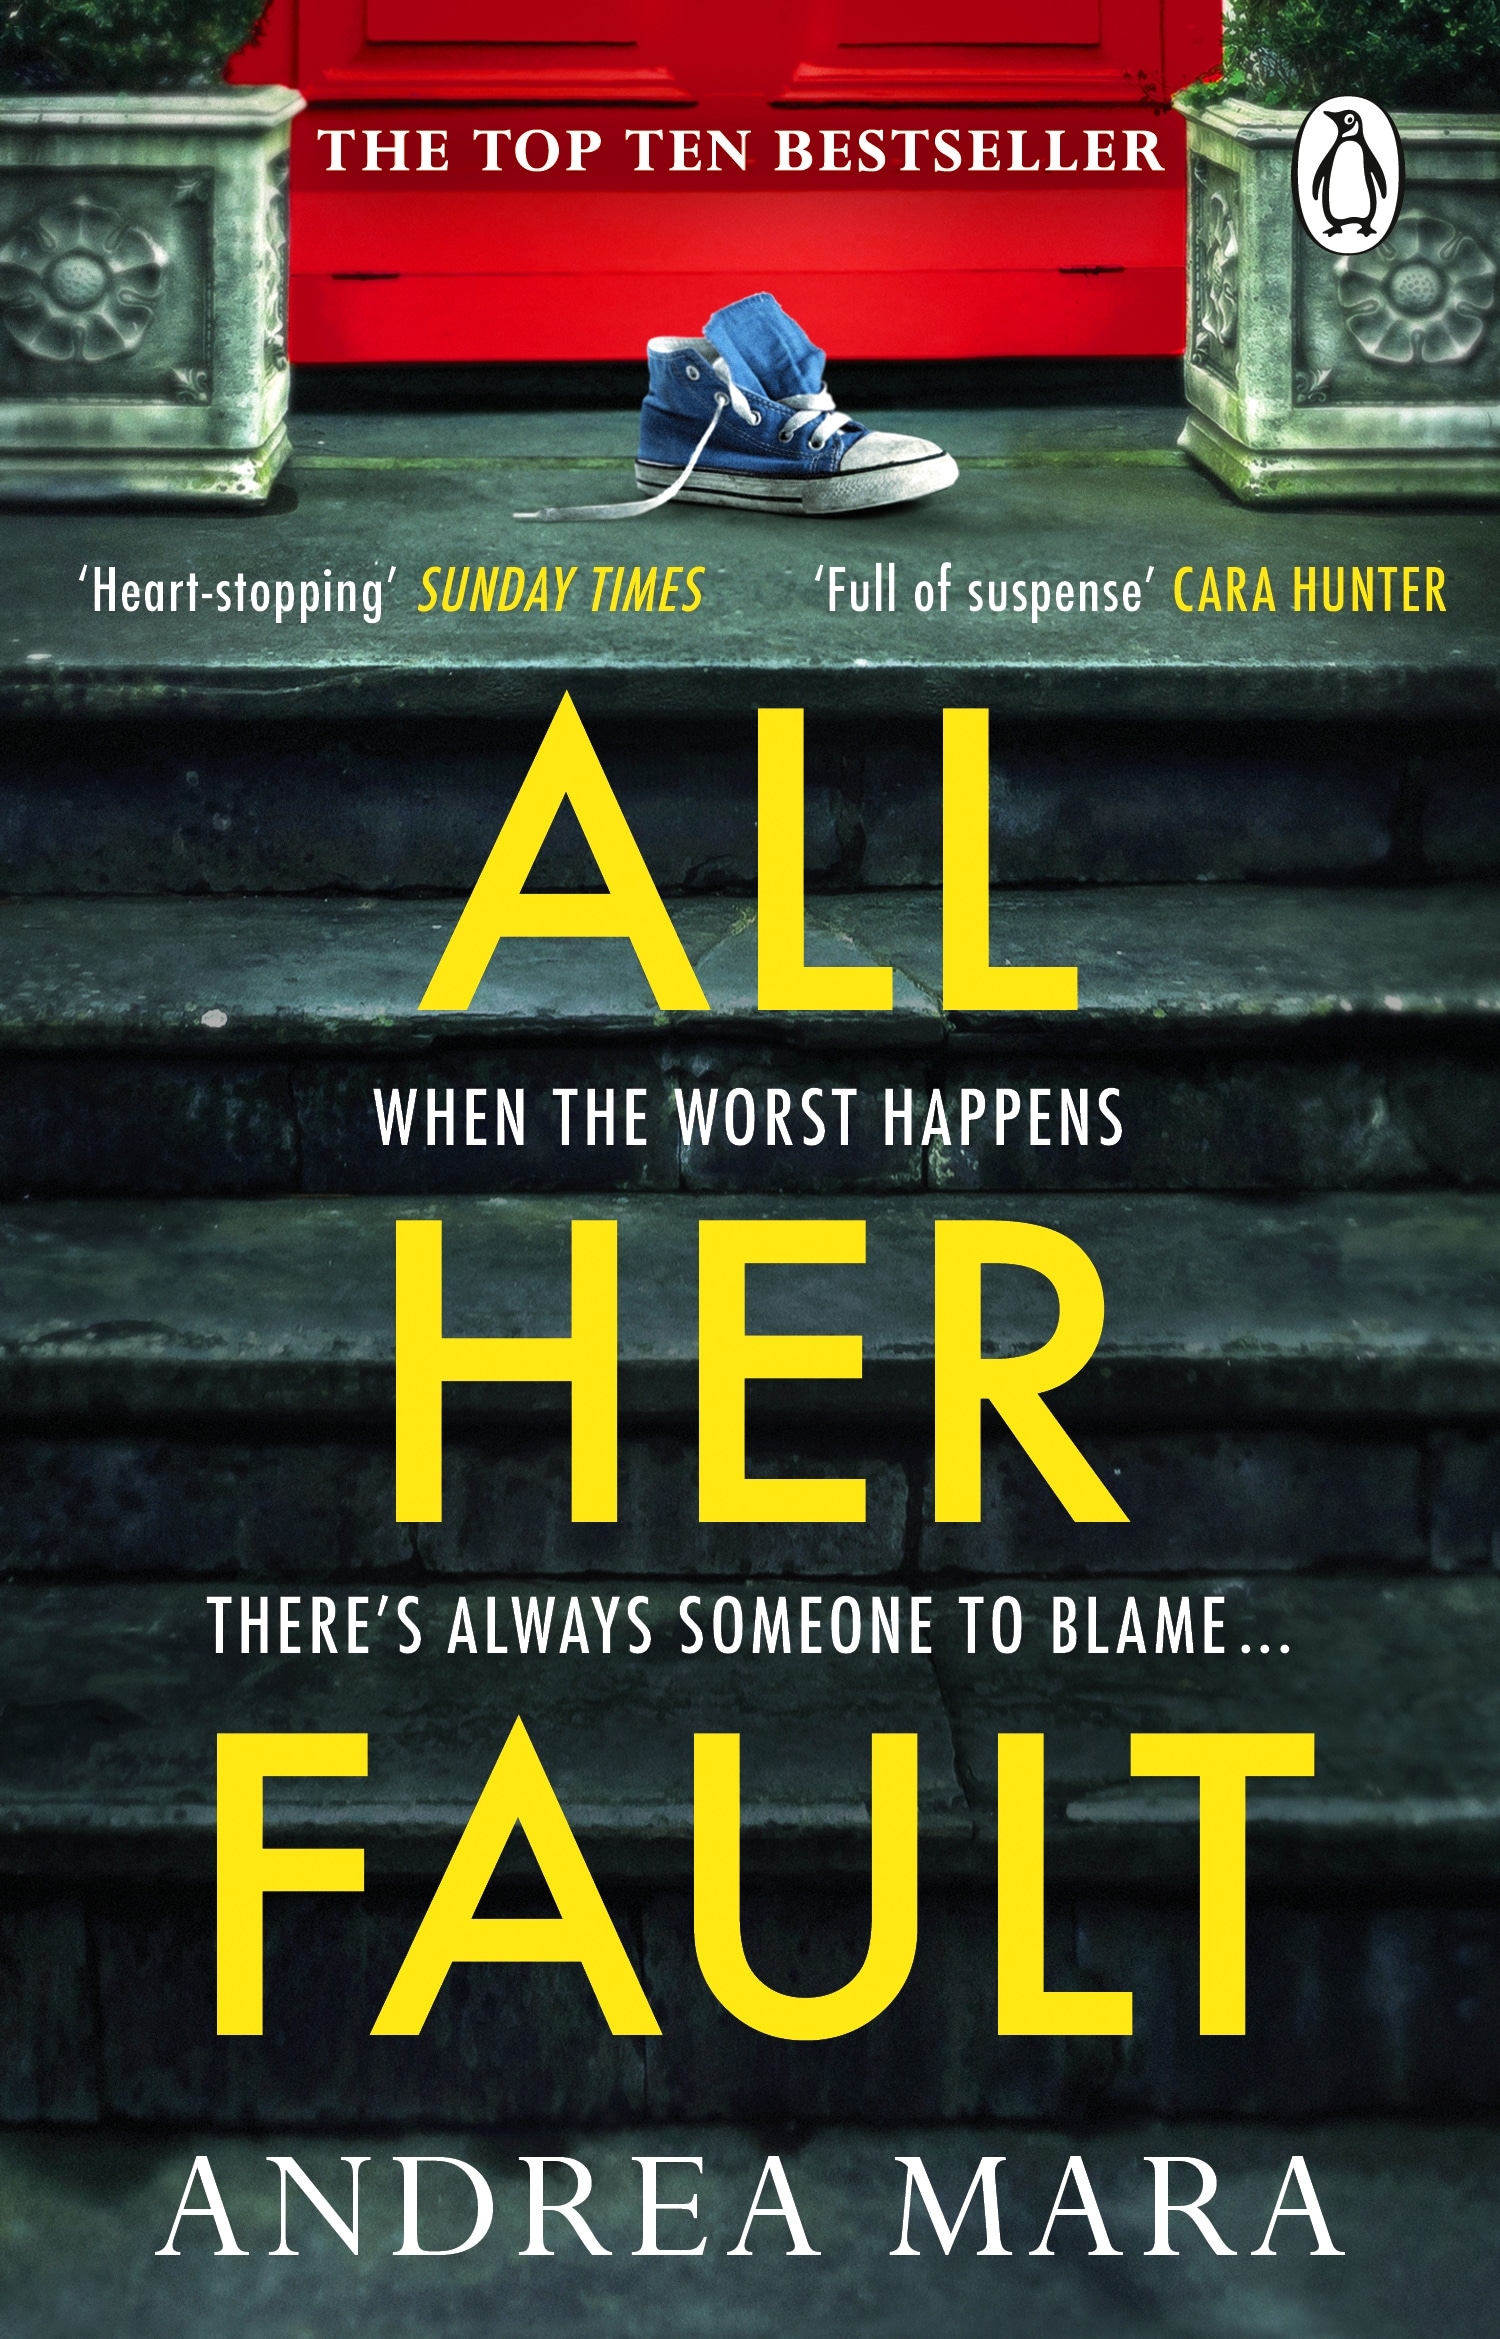 Book “All Her Fault” by Andrea Mara — February 3, 2022